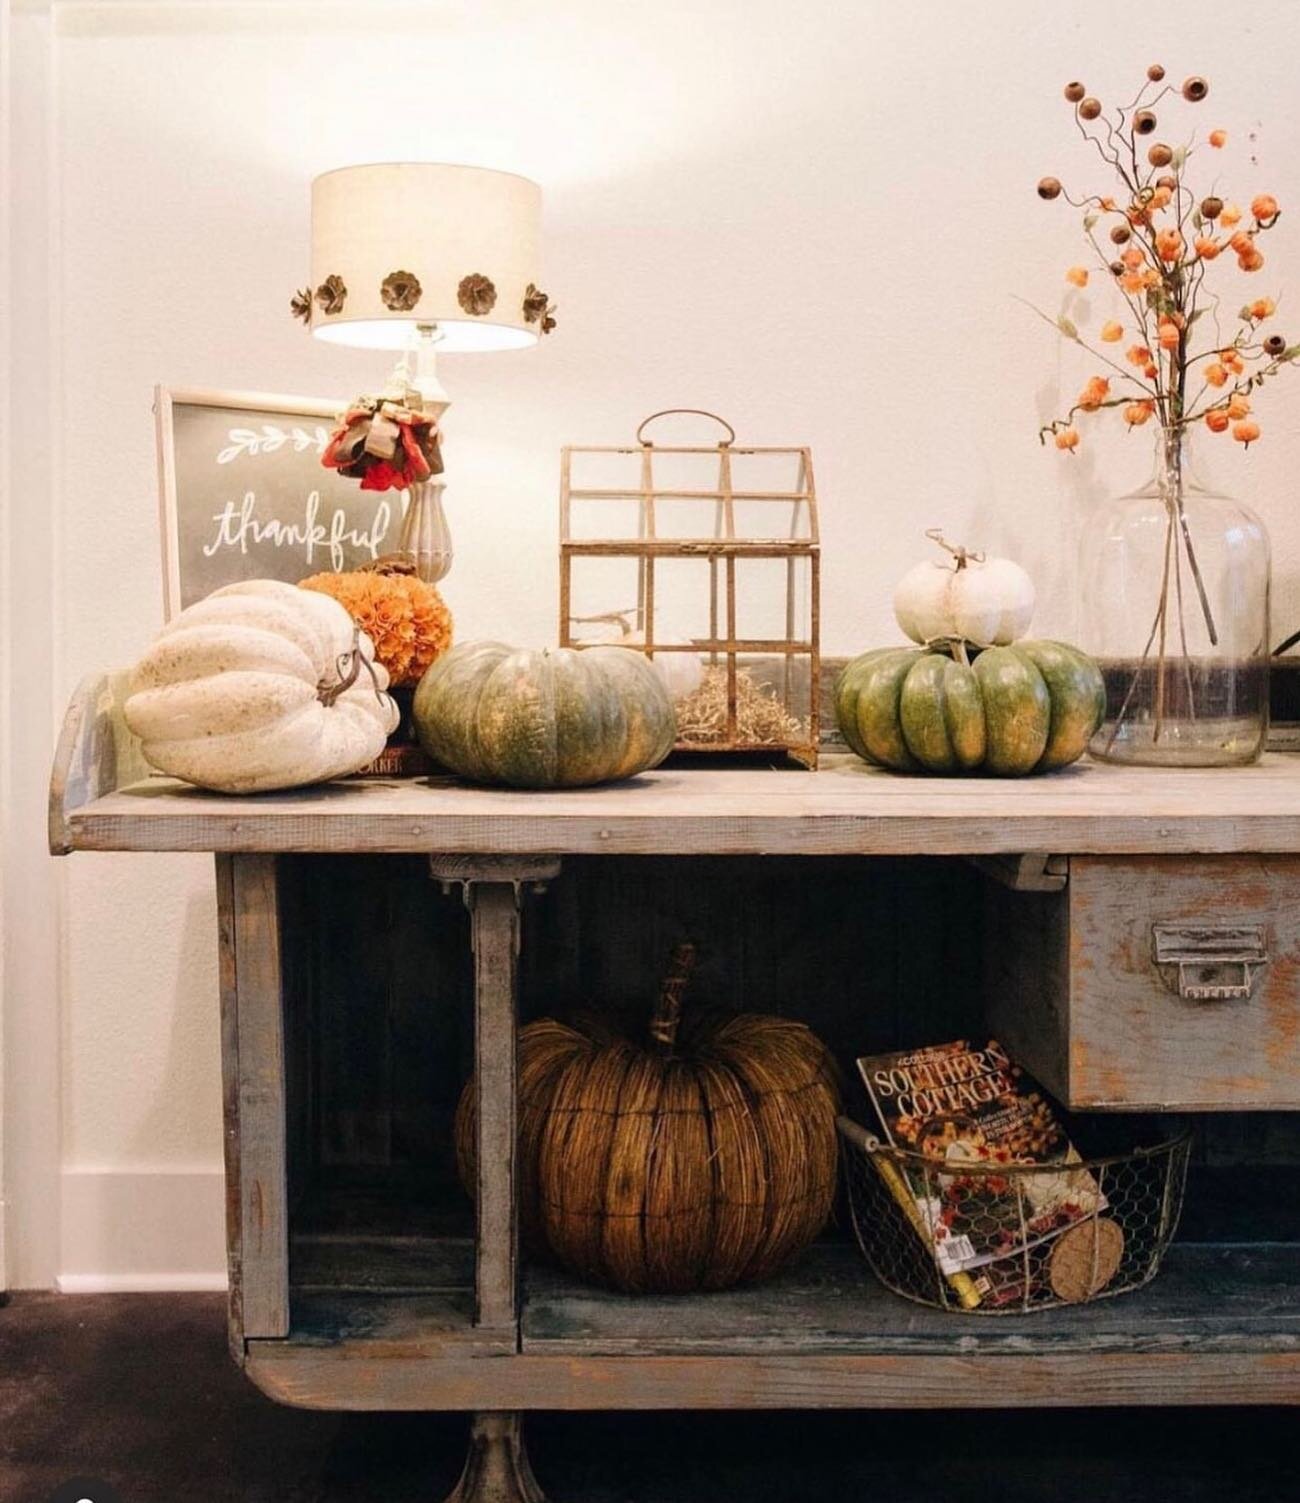 Happy September!!!!
I am so READY to decorate for fall and to re-do the stores this week with all the fall goodies!!
When do you bring the pumpkins out?
Is it a certain date or does it depend on the temperature for you?
I&rsquo;ve been waiting until 